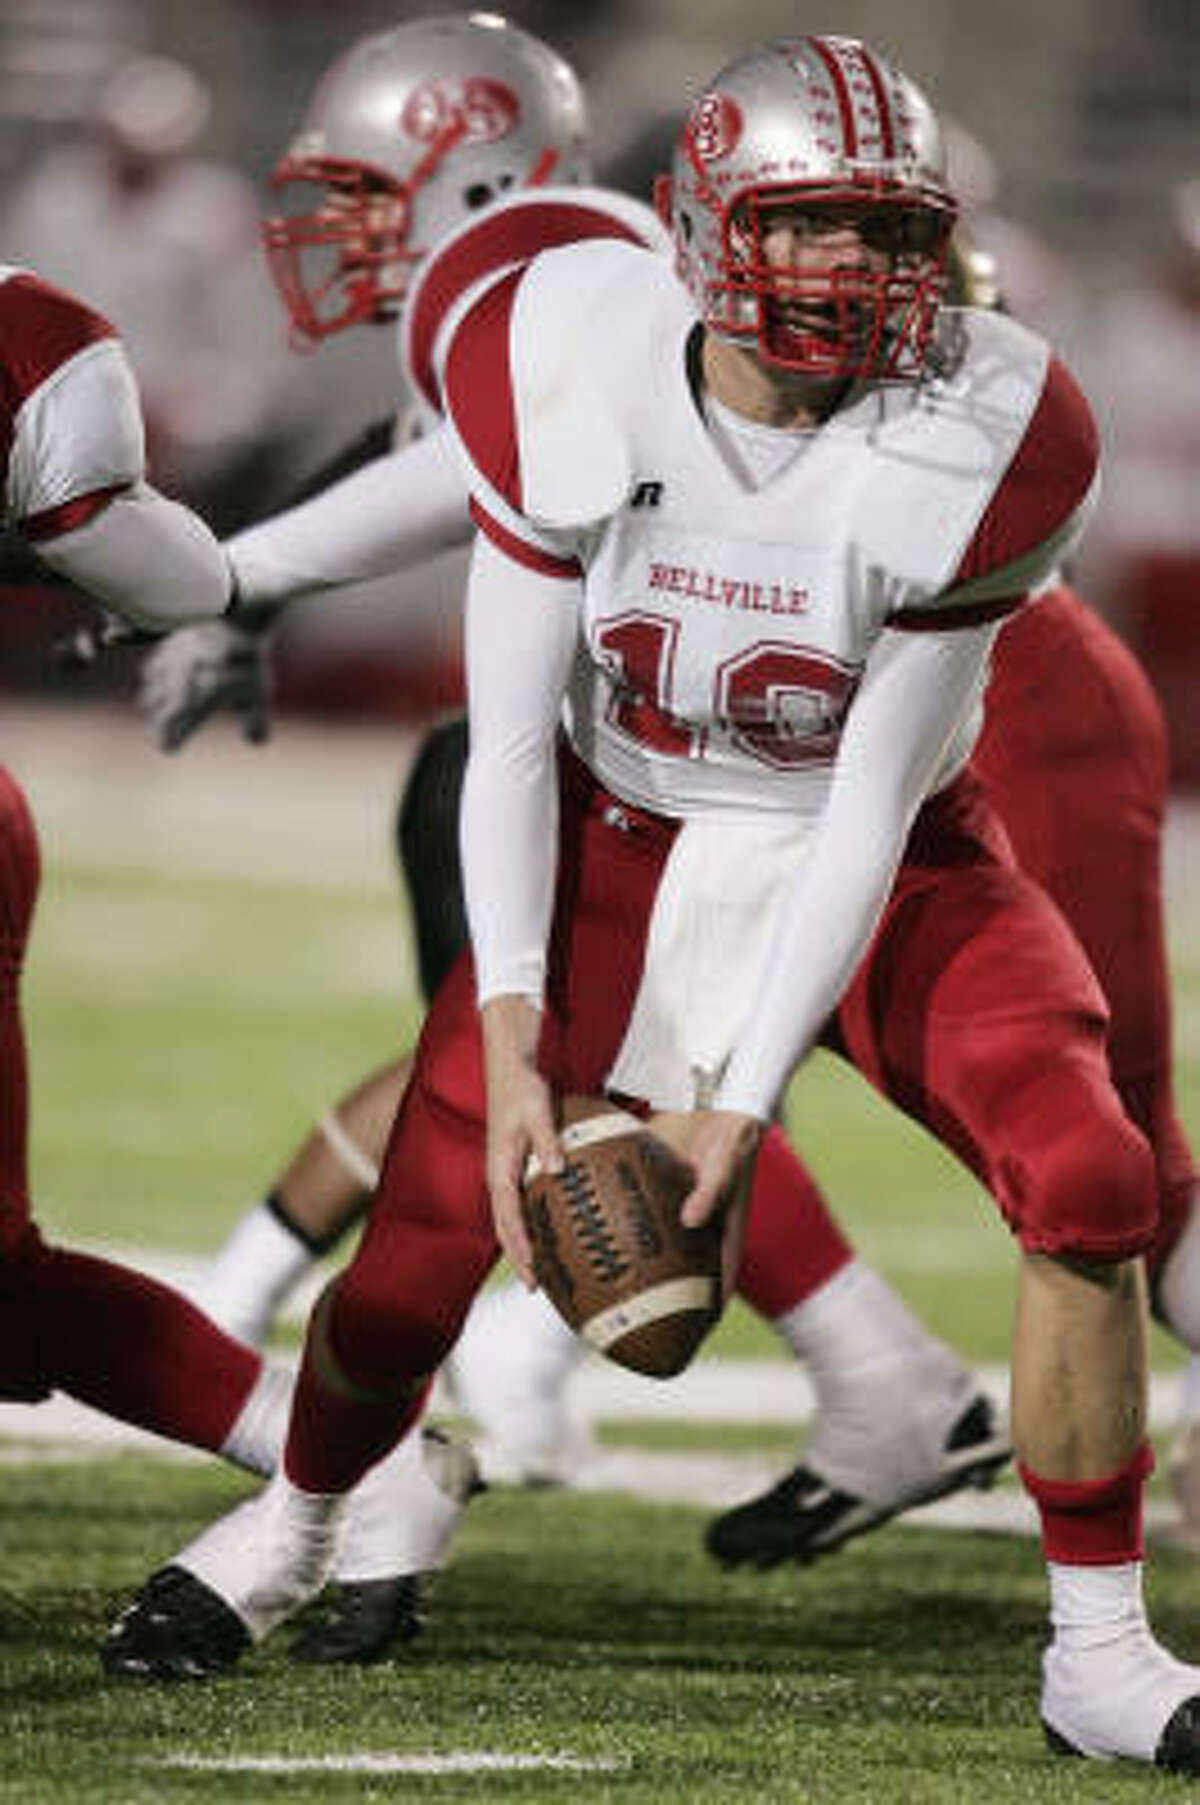 Class 3A schools Kyle Mueller, Sr., QB, Bellville Under a new head coach, Mueller will be a key leader for the Brahmas. He threw for more than 1,200 yards last year.